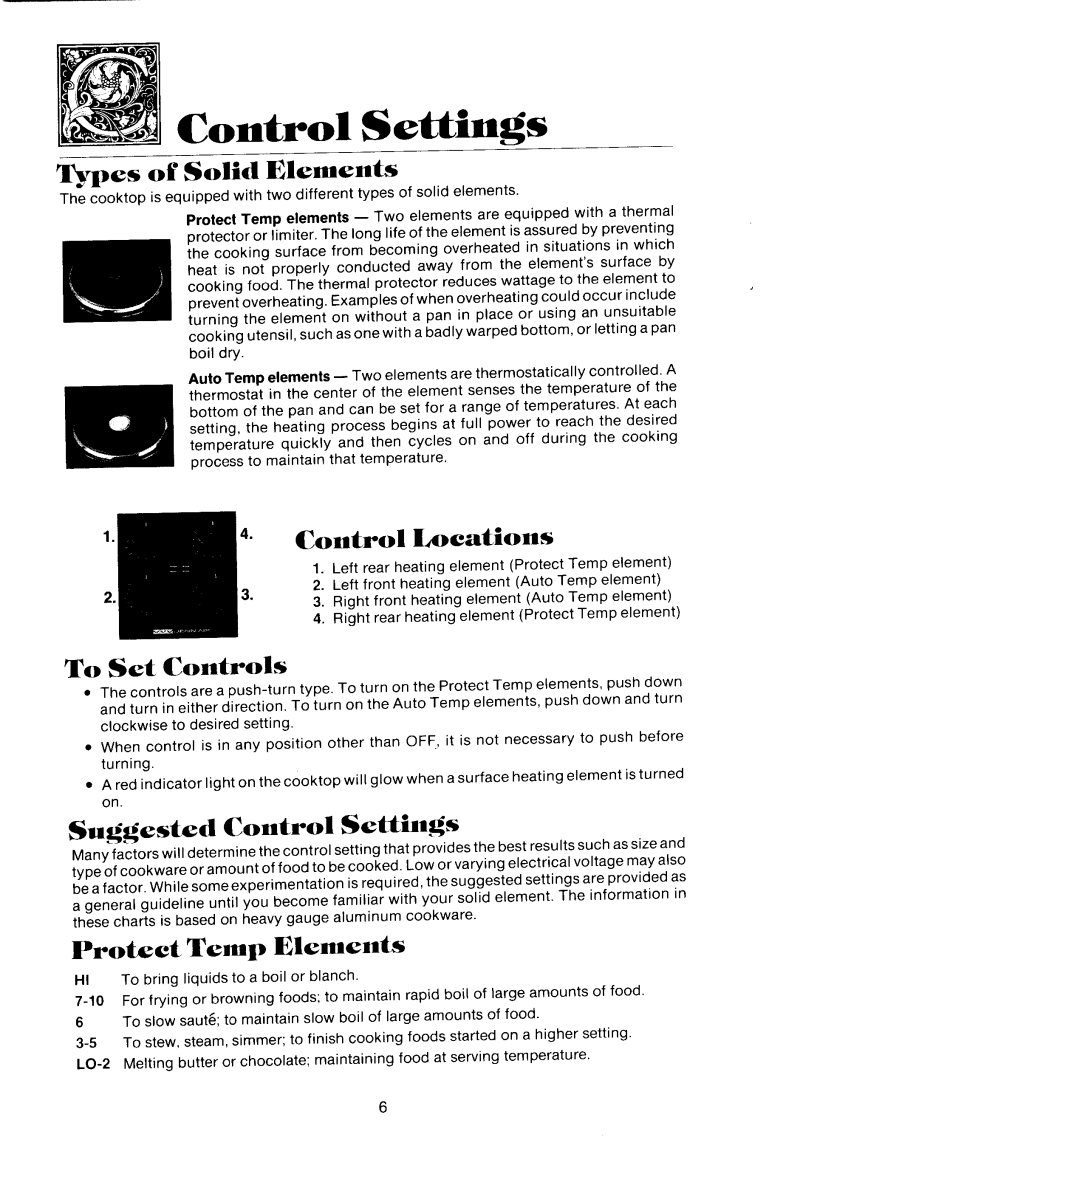 Jenn-Air CCS446 Control Settings, Types of Solid Elements, Control Locations, To Set Controls, Suggested Control Setthlgs 